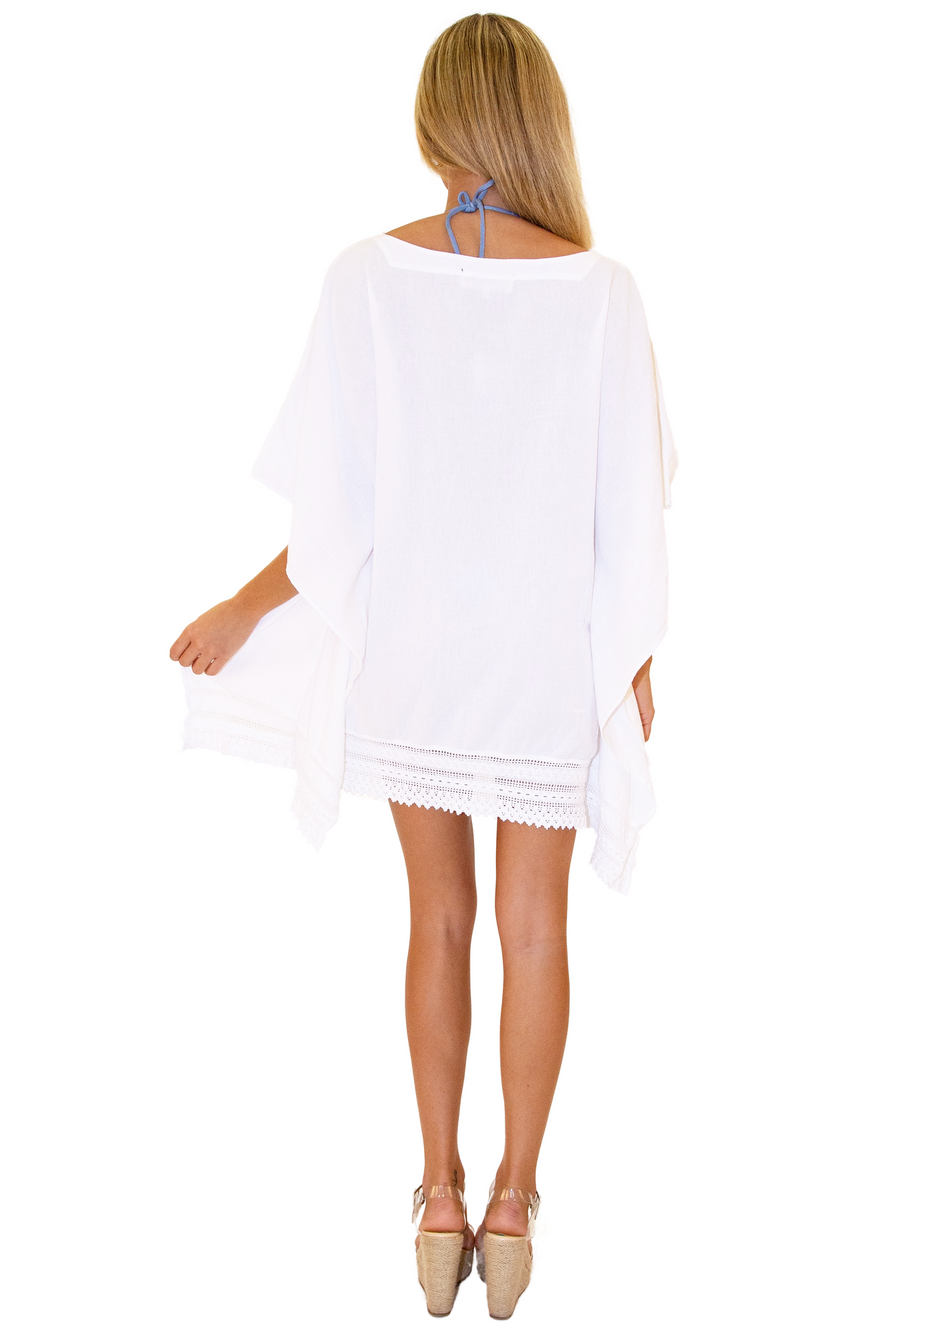 NW1246 - White Cotton Cover-Up